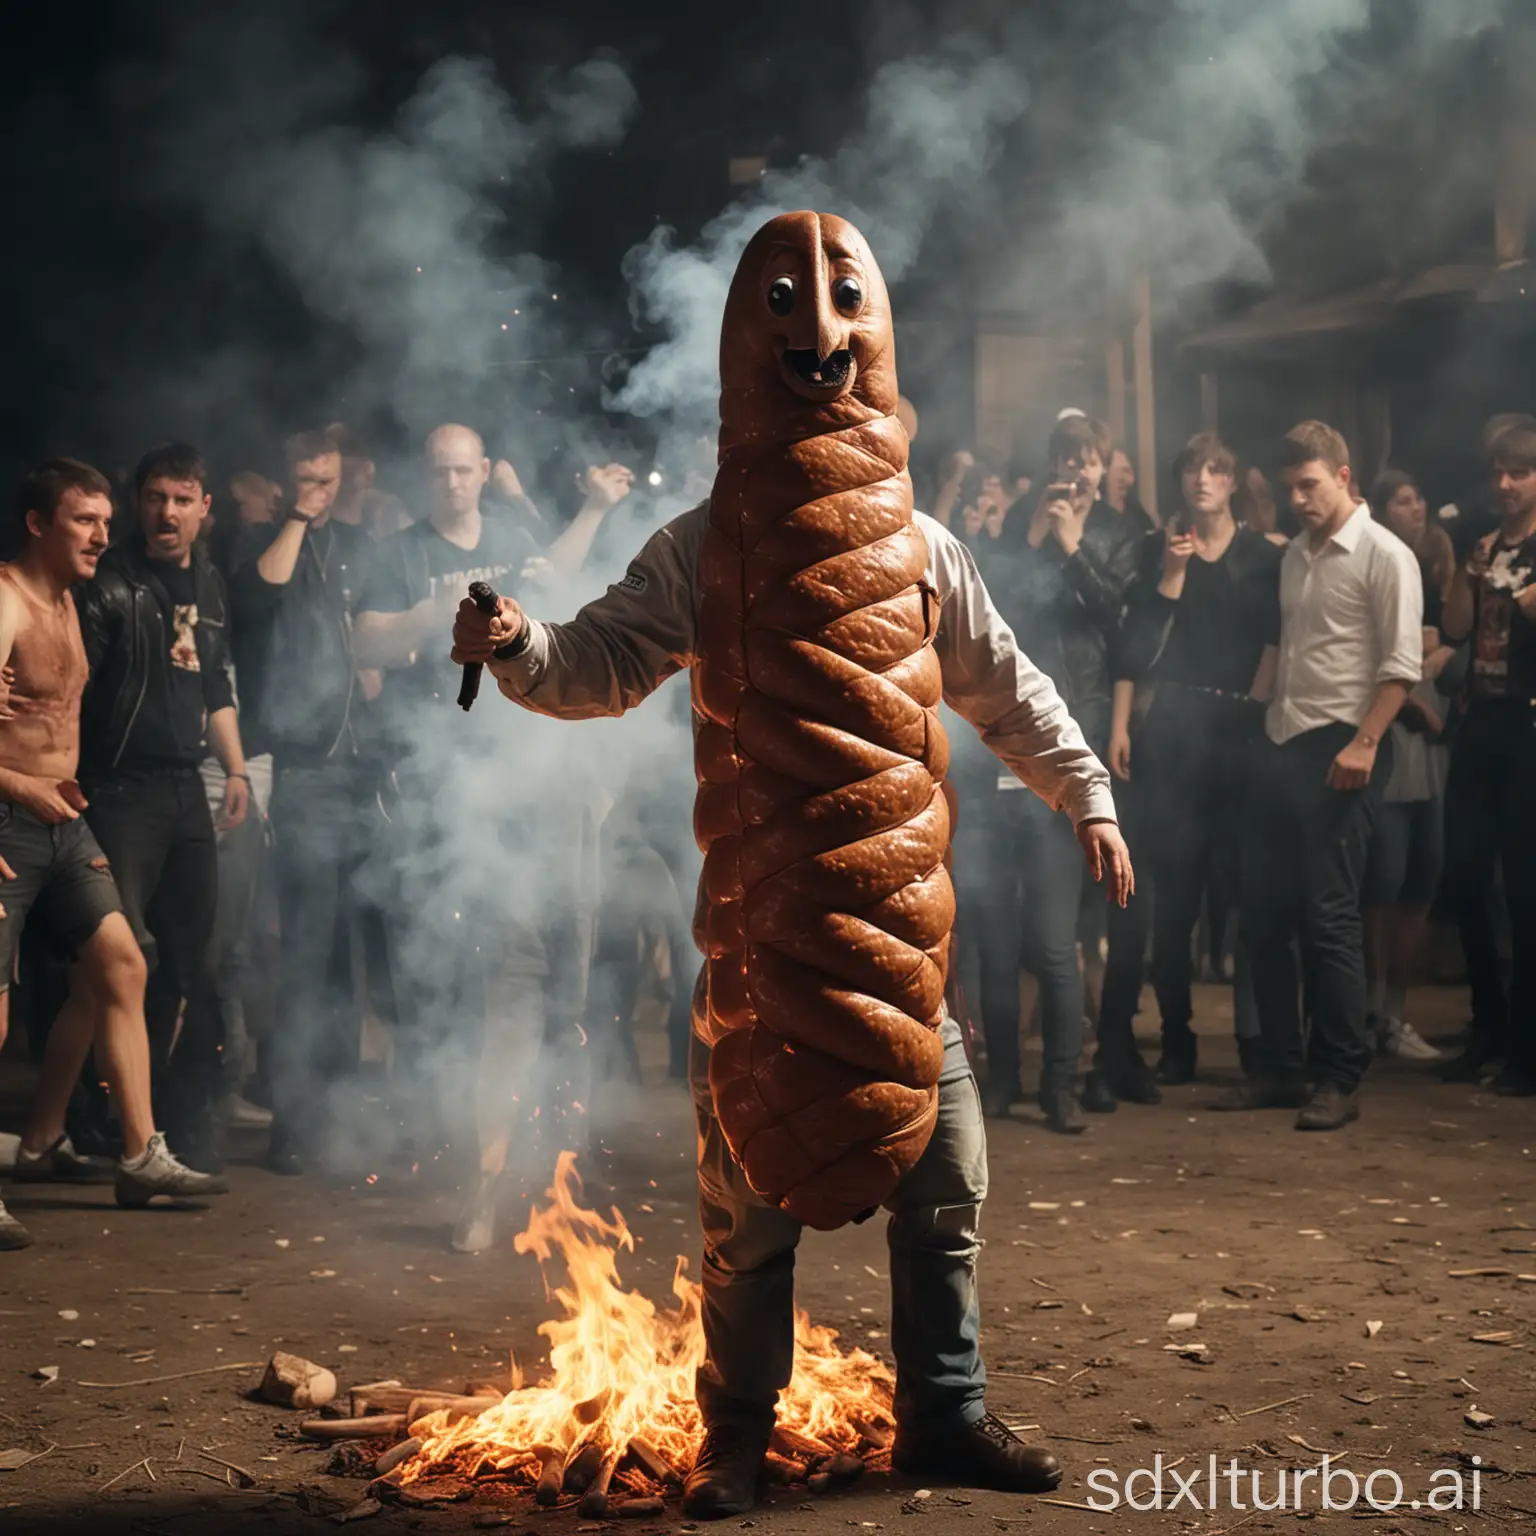 real nikon canon kodak photo of an anthropomorphic sausage, a man consisting of sausages, burns out at the Russian village disco hardbass brostep emo post-hardcore, very much bends in the ((dance)), epic, dynamic